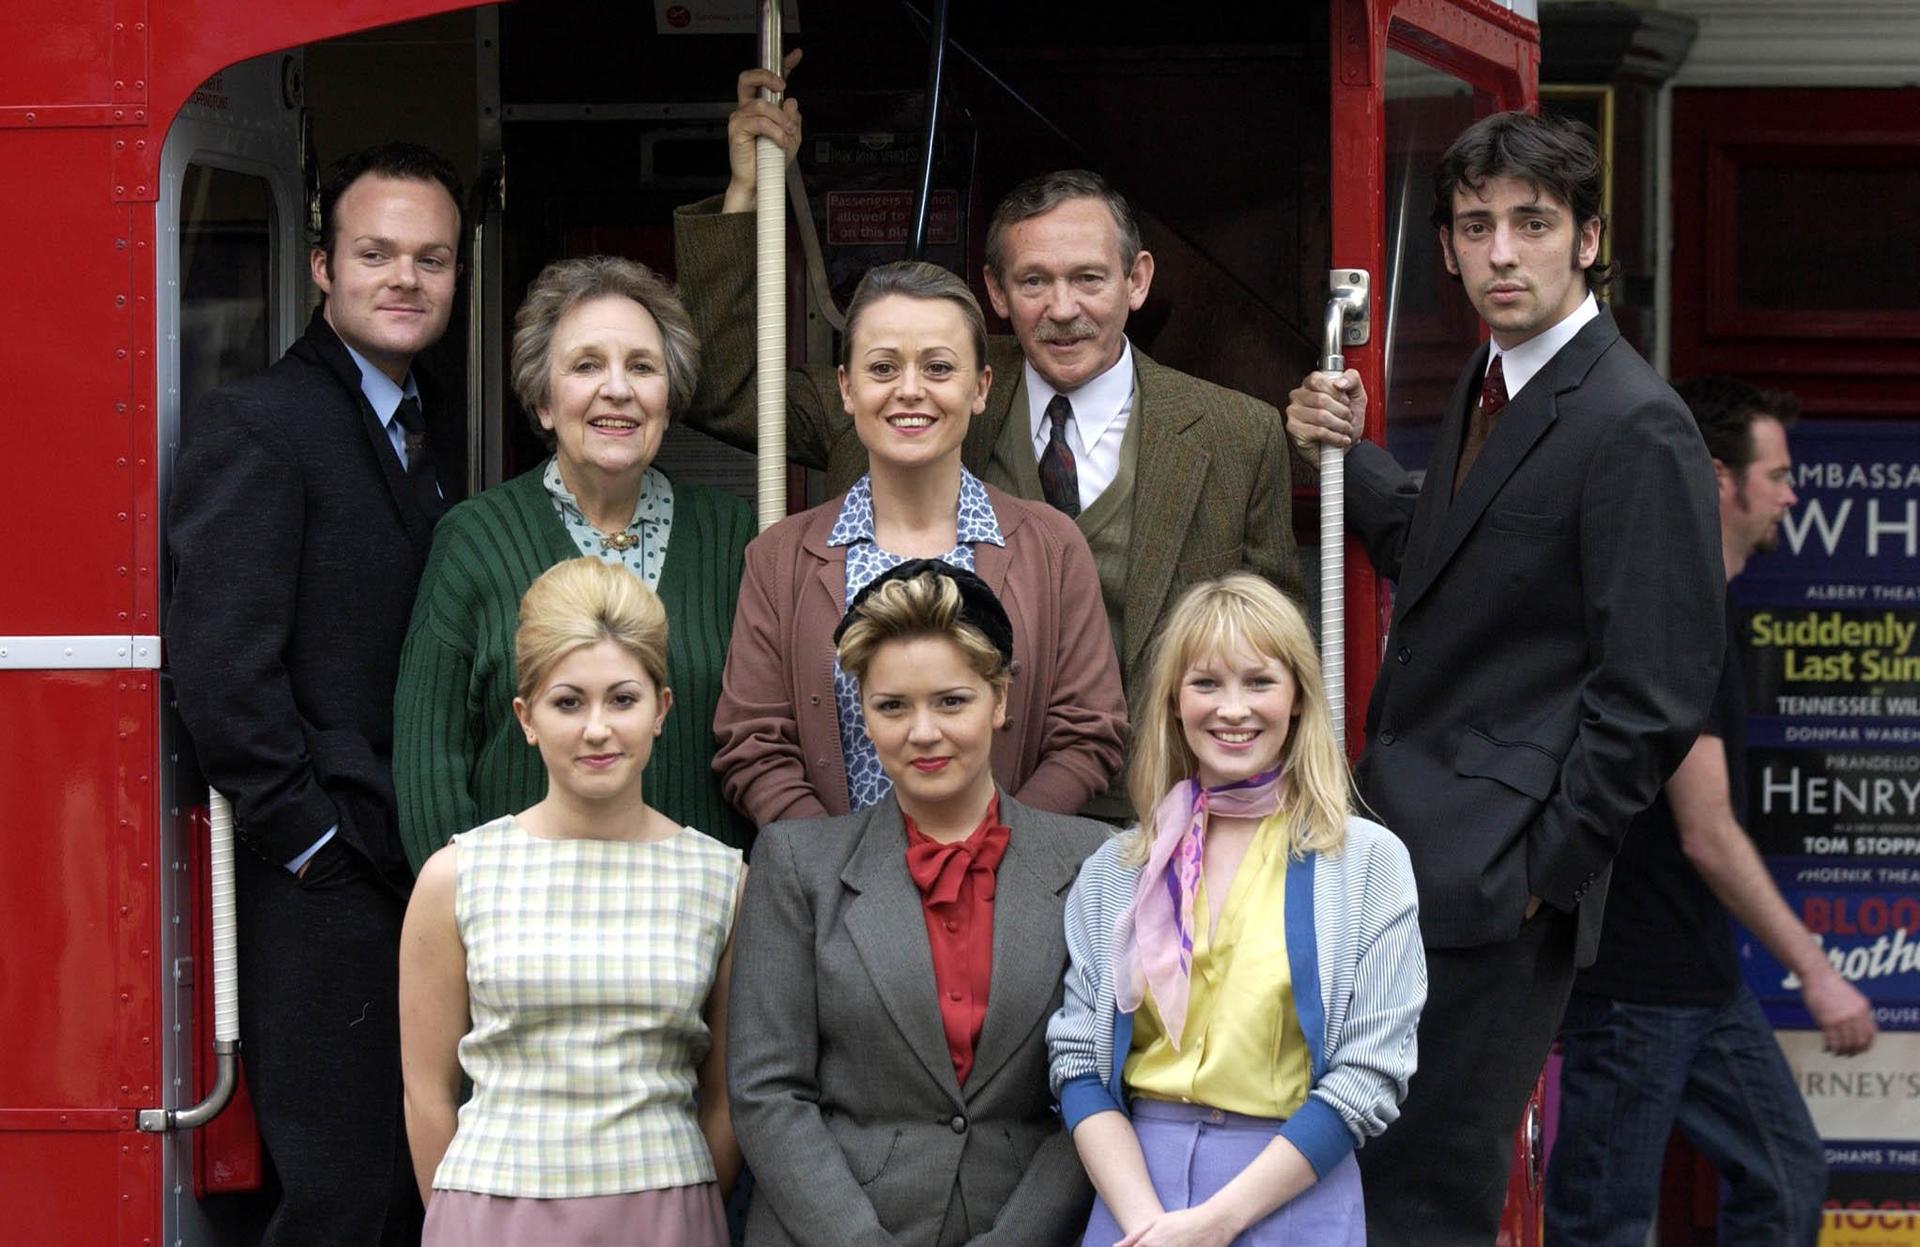 (Back left to right) Matt Hickey, Doreen Mantle, Tracie Bennett, Paul Copley, Ralf Little, (front left to right) Sarah Churm, Rachel Leskovac and Joanna Page pose for photographers during a photocall to launch the forthcoming production of Keith Wathouse and Willis Hall's classic comedy 'Billy Liar'', at the Duke of York's Theatre in central London.'.